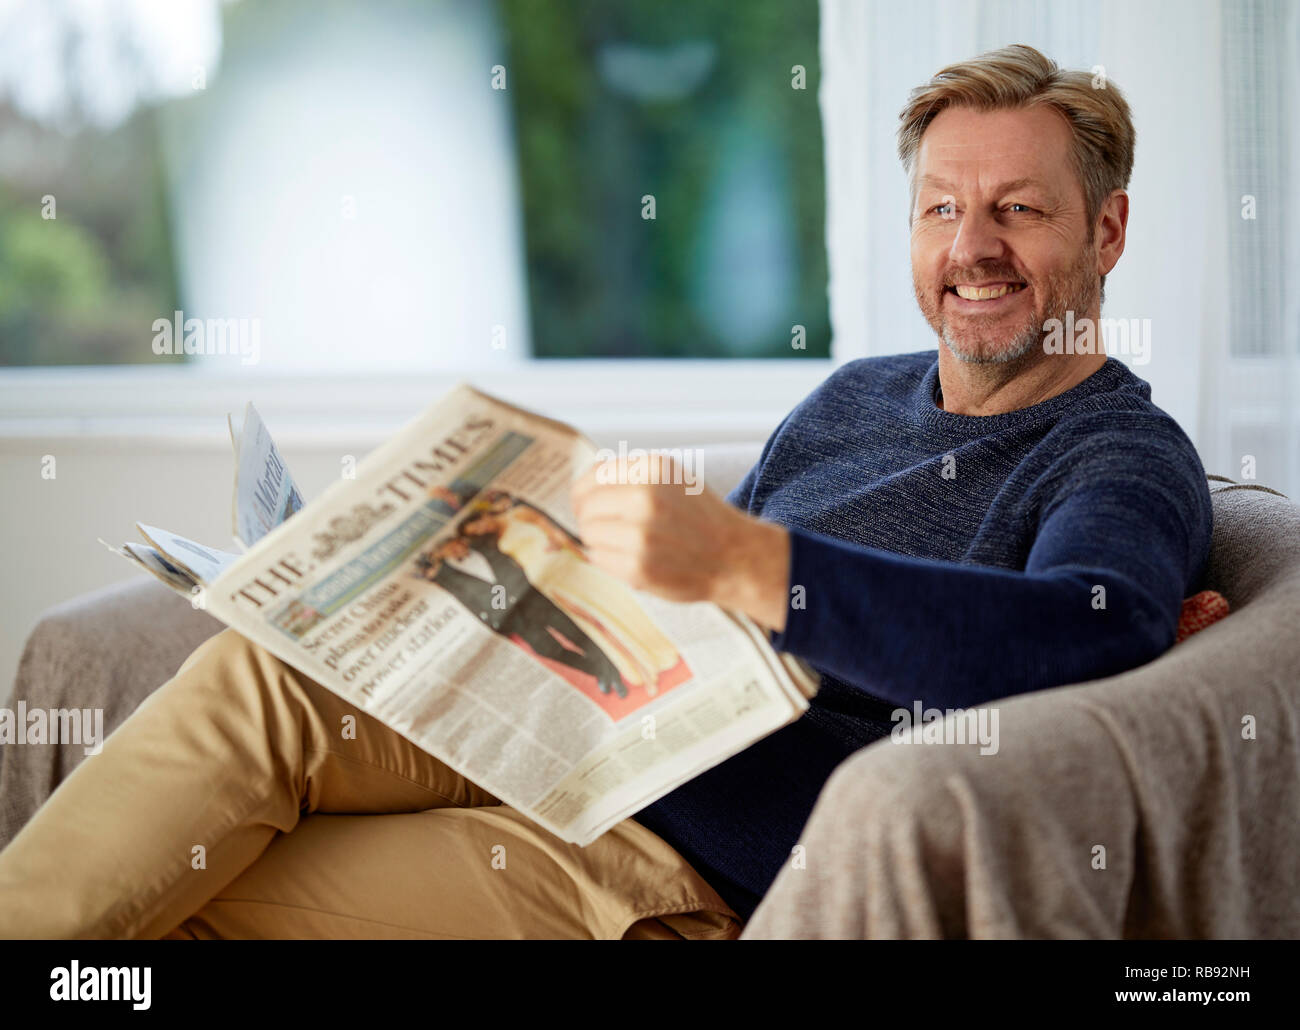 Man relaxing on a sofa reading a paper Stock Photo